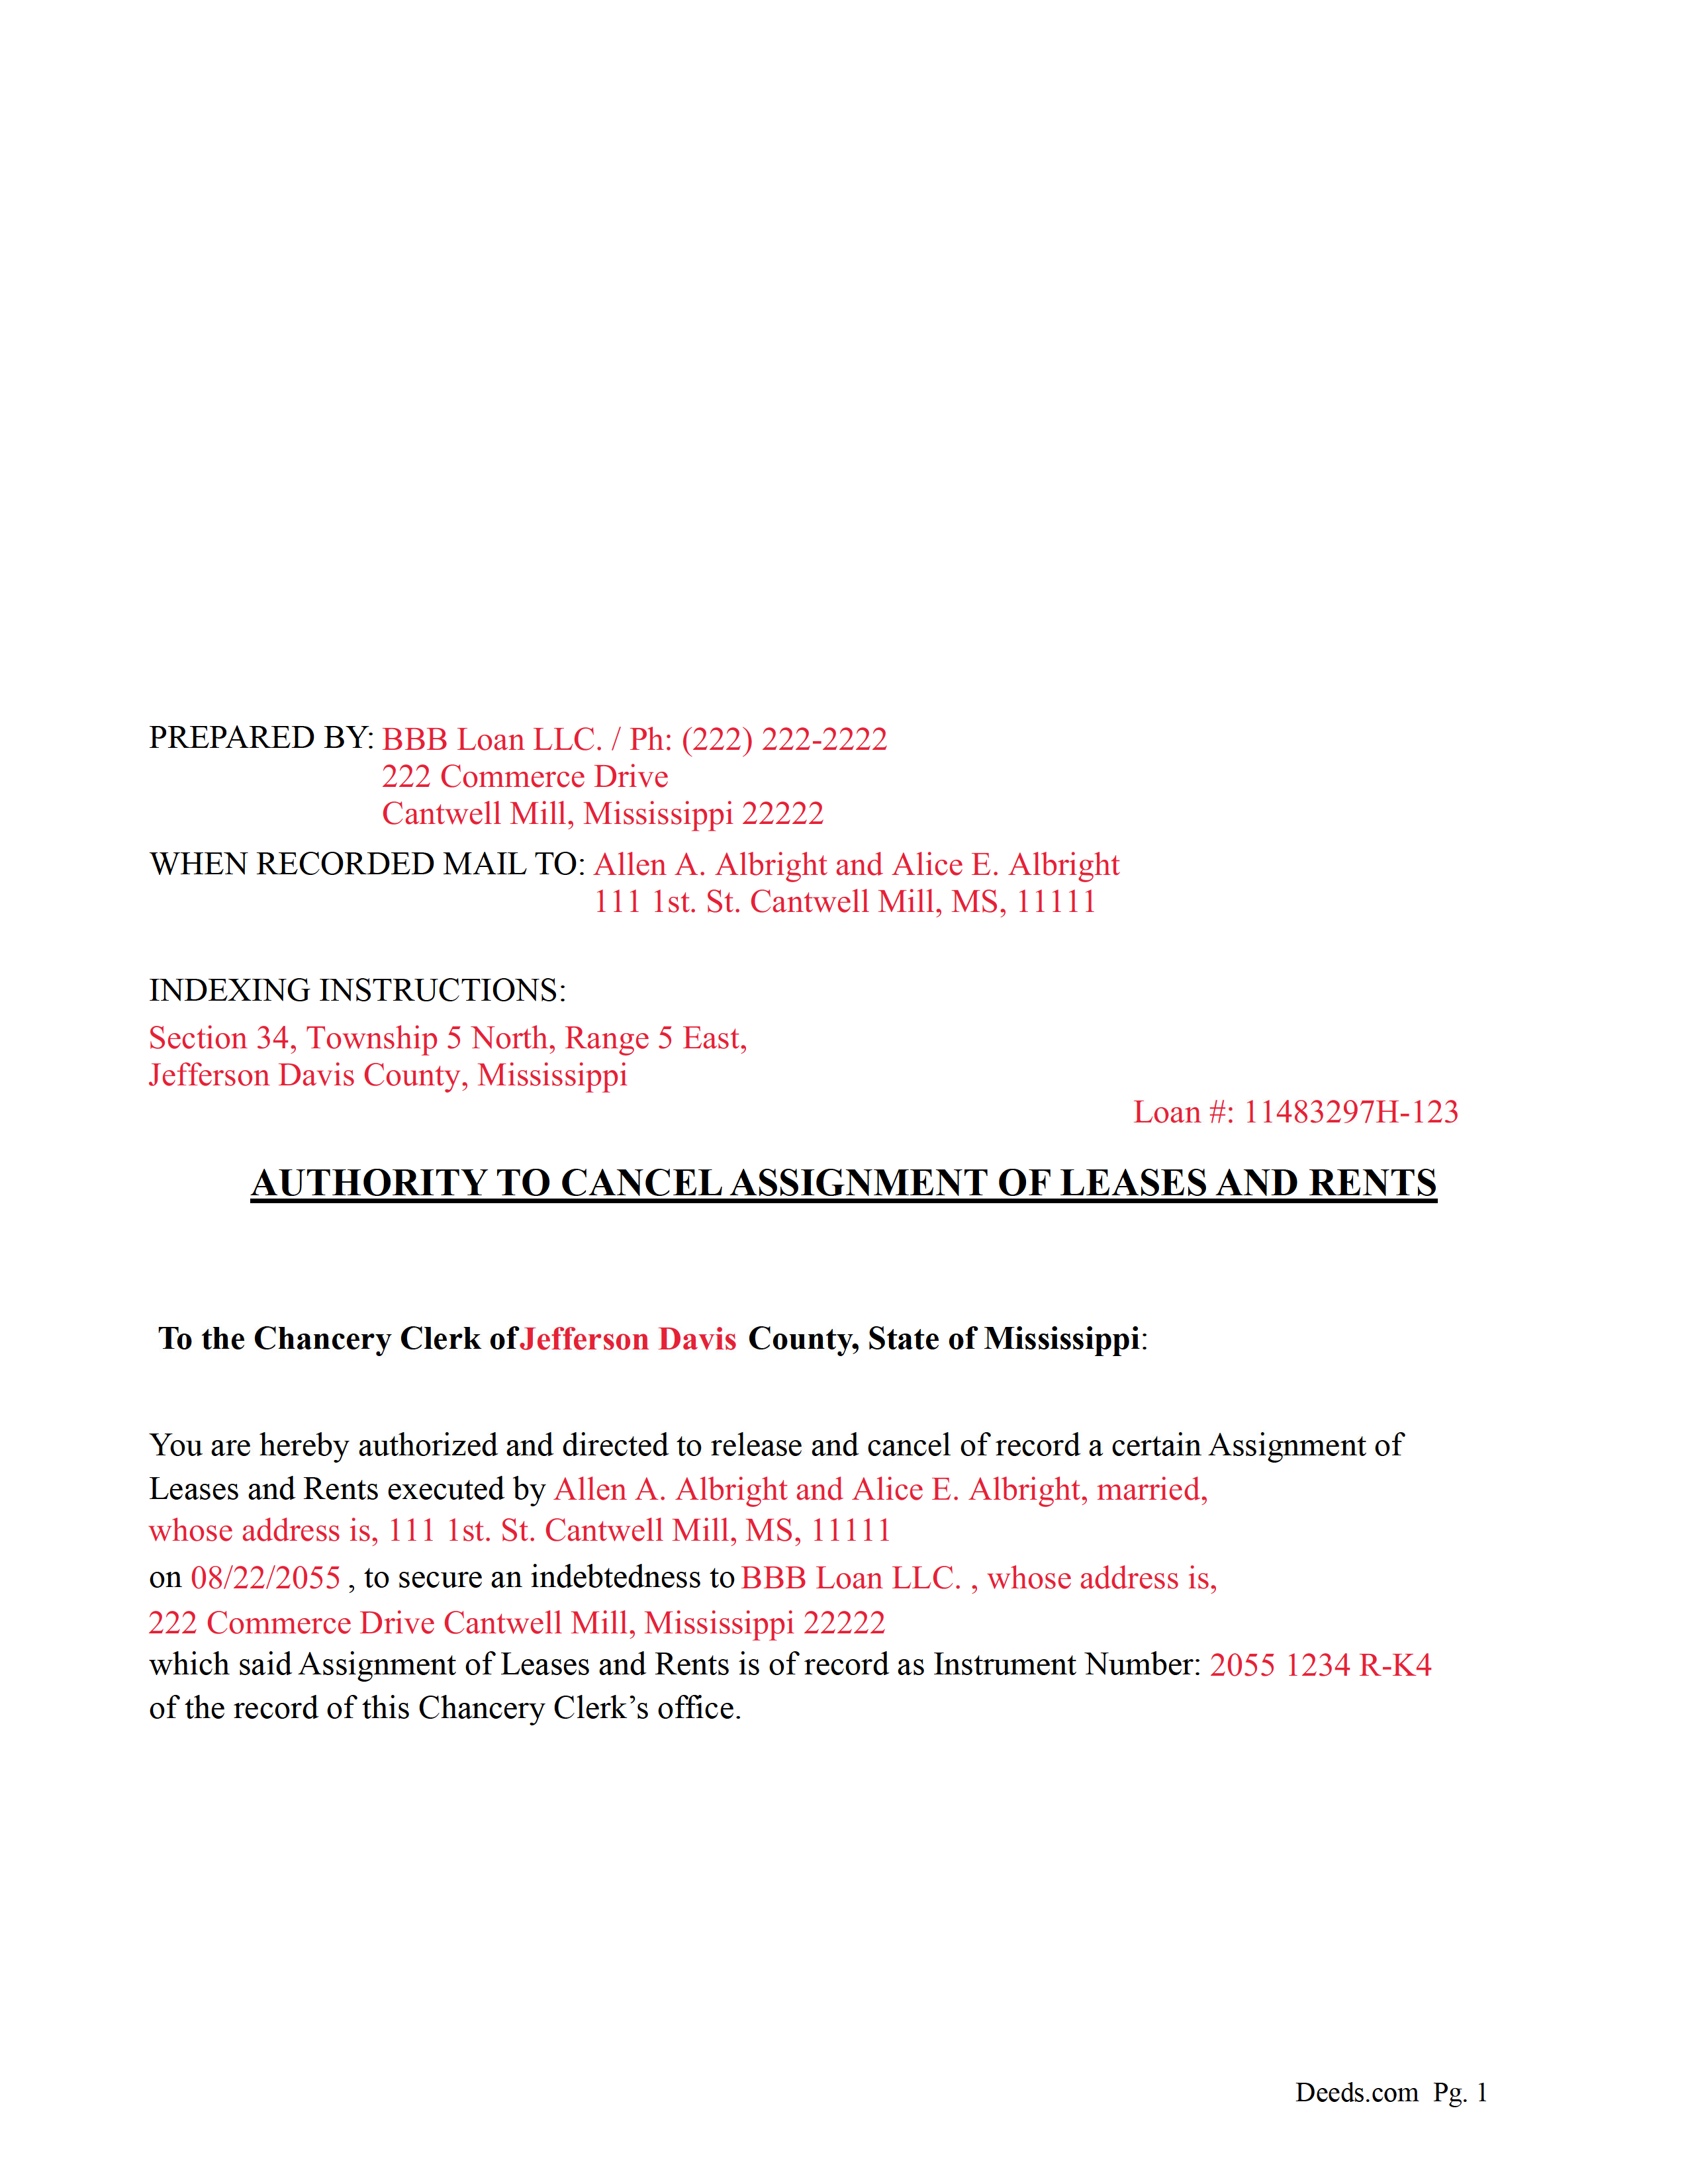 Lowndes County Completed Example of the Authority to Cancel Assignment of Leases and Rents Document